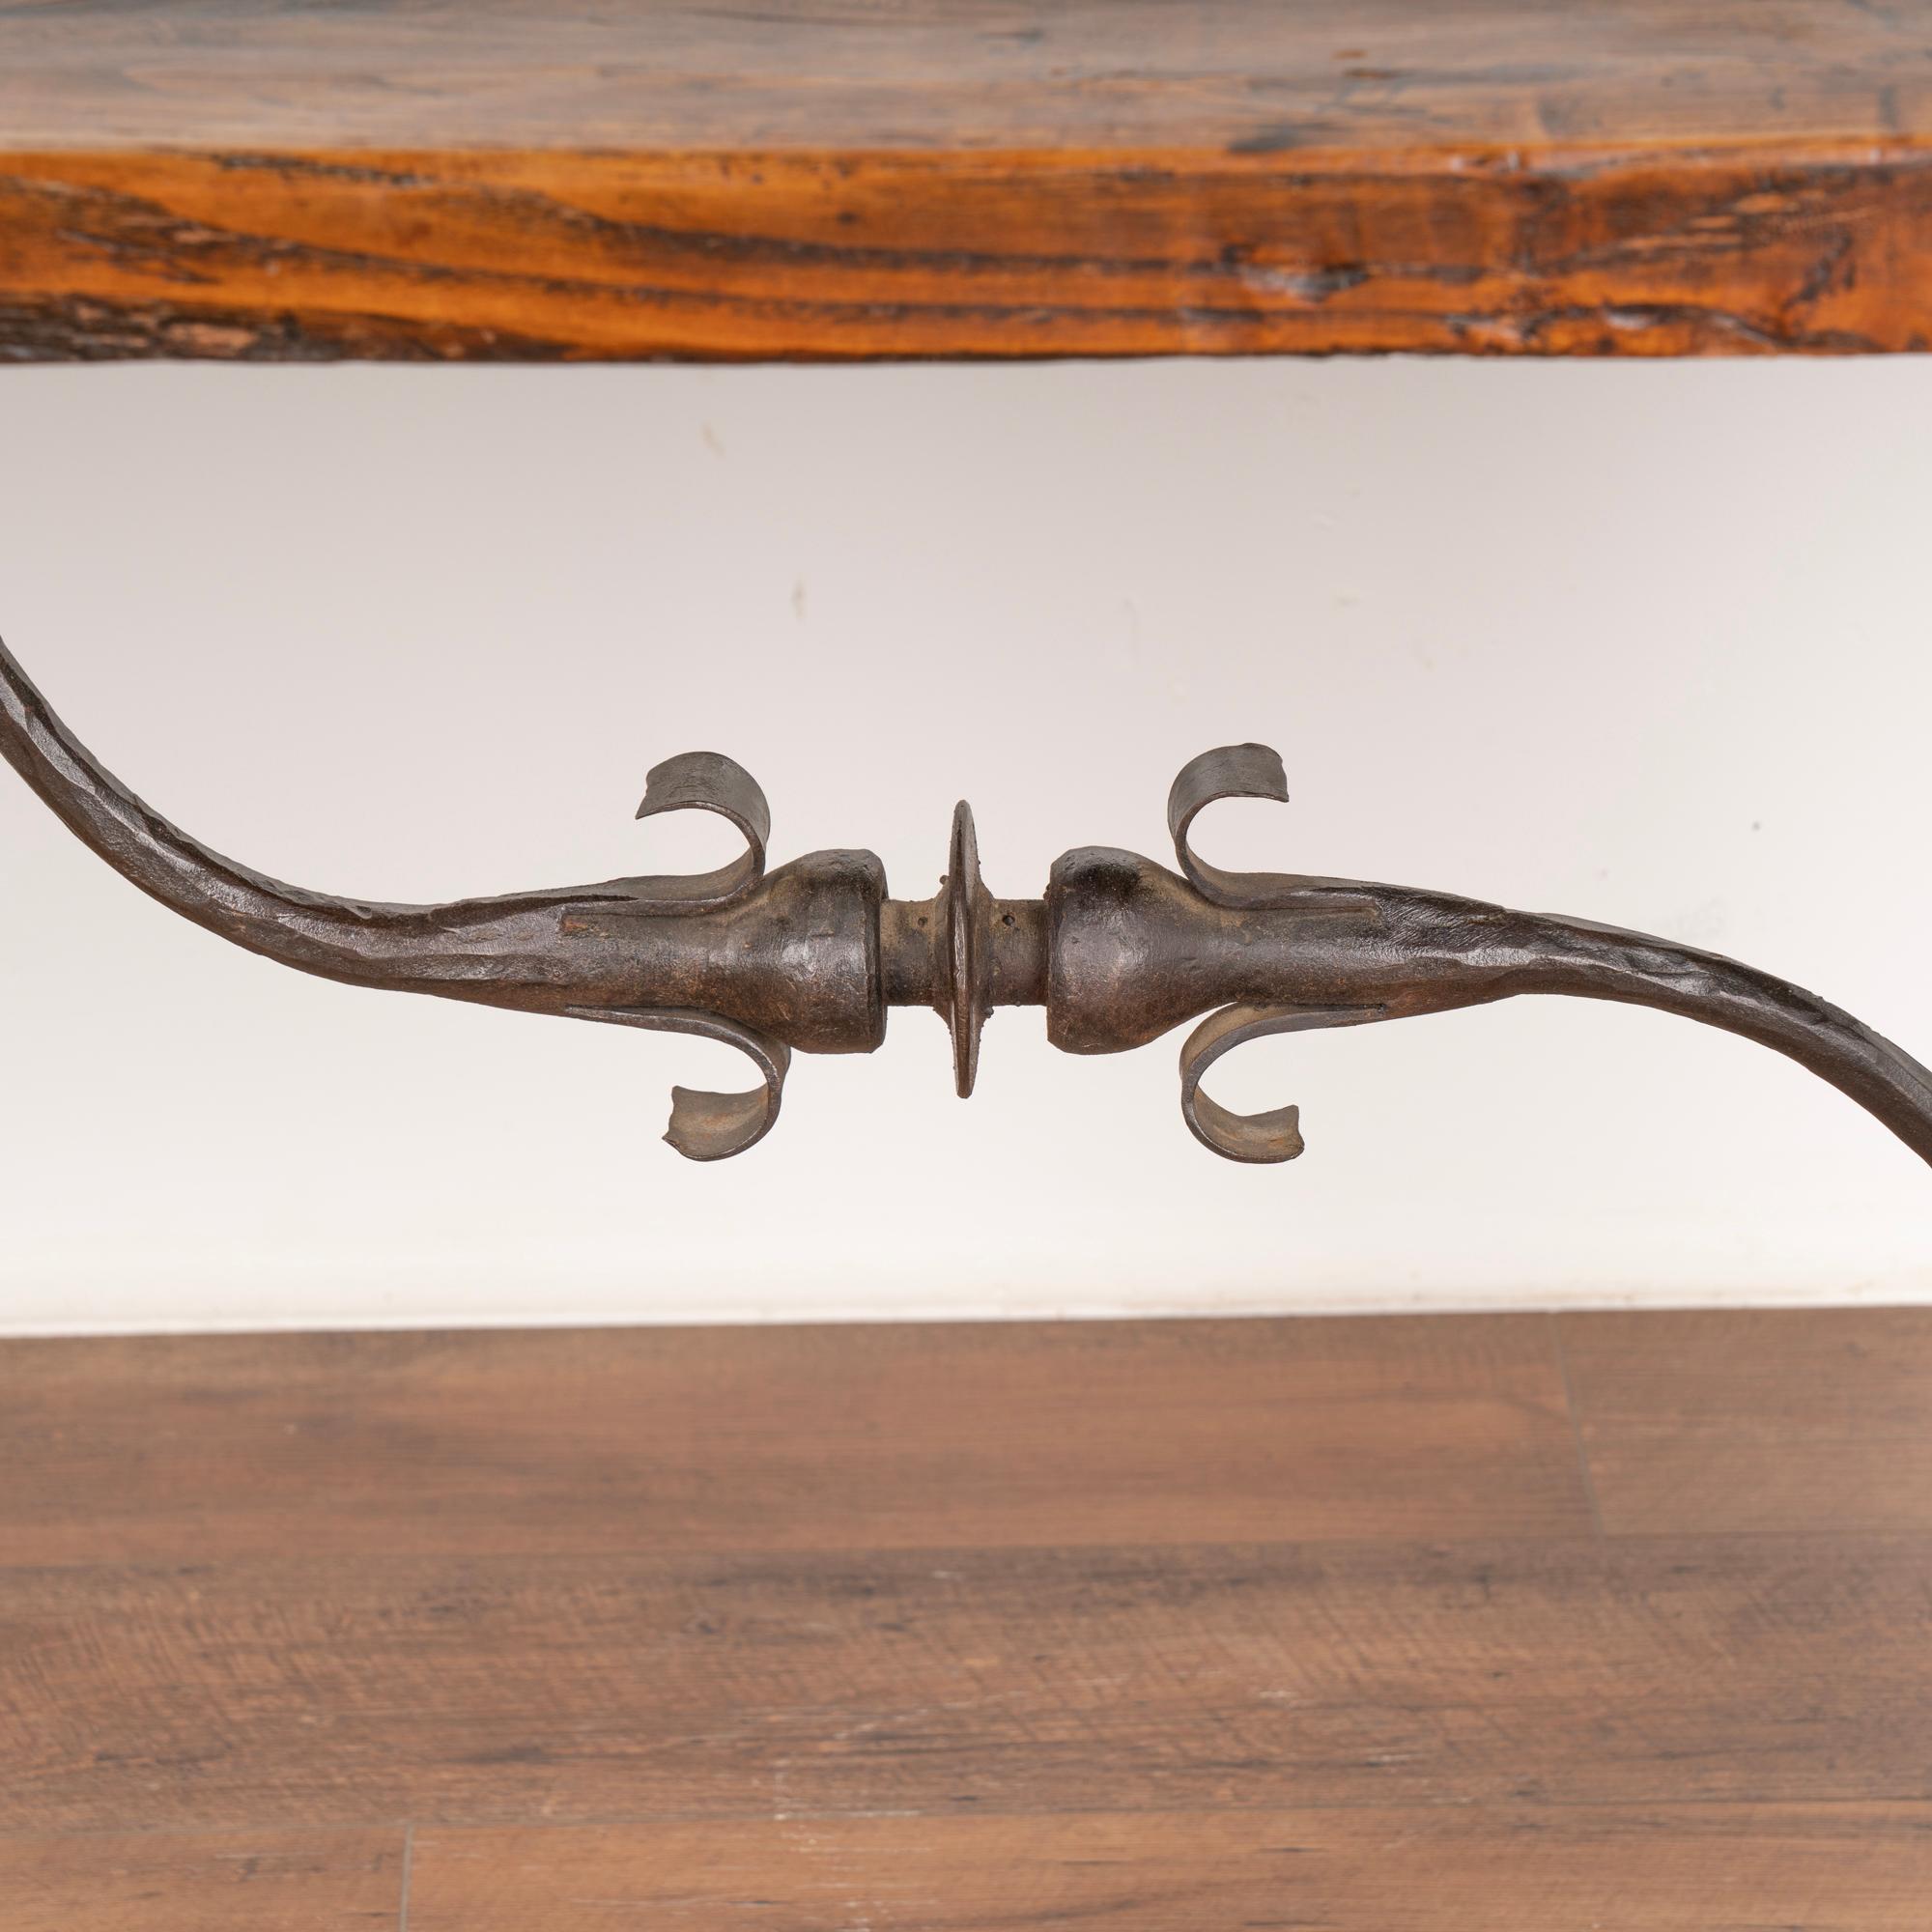 Spanish Colonial Antique Dining Table with Turned Legs and Scrolled Iron Stretcher from Spain